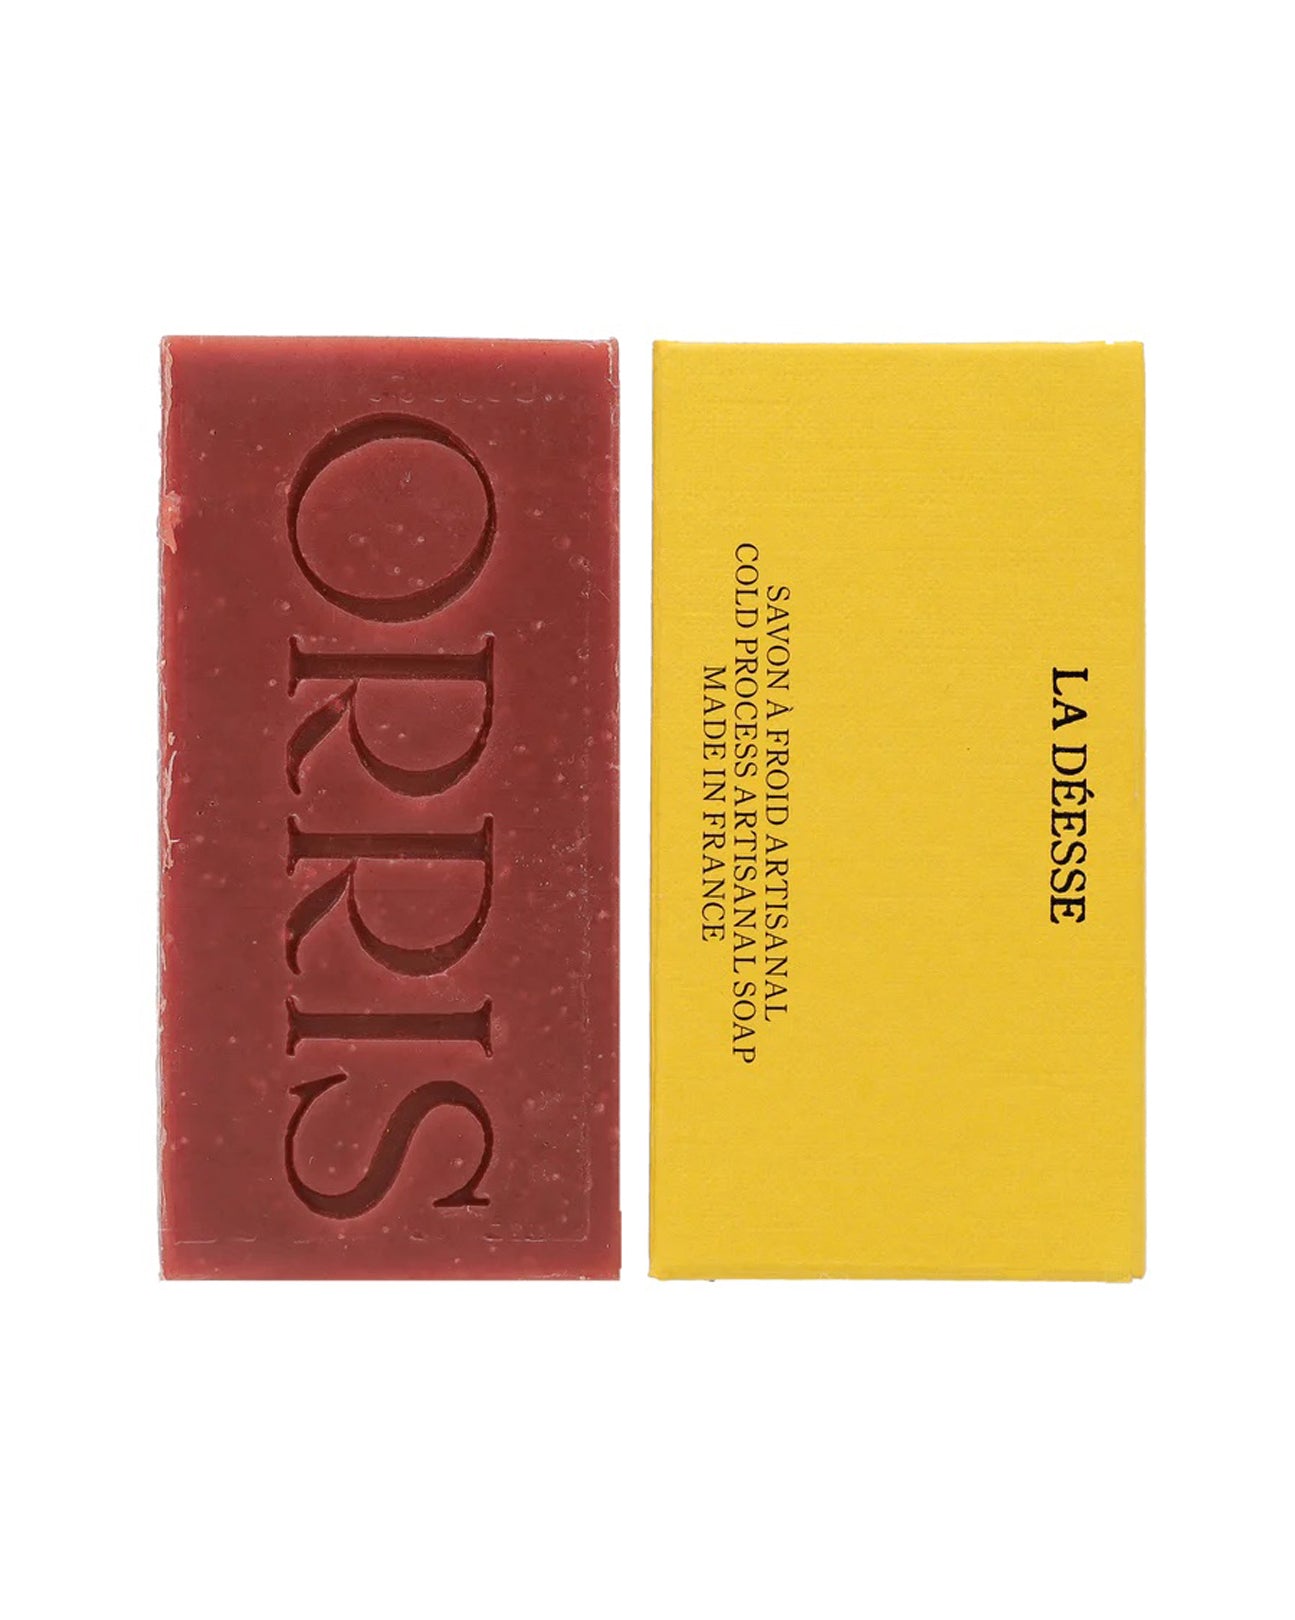 ORRIS All Natural Cold Process Soap in Le Déesse available at Lahn.shop